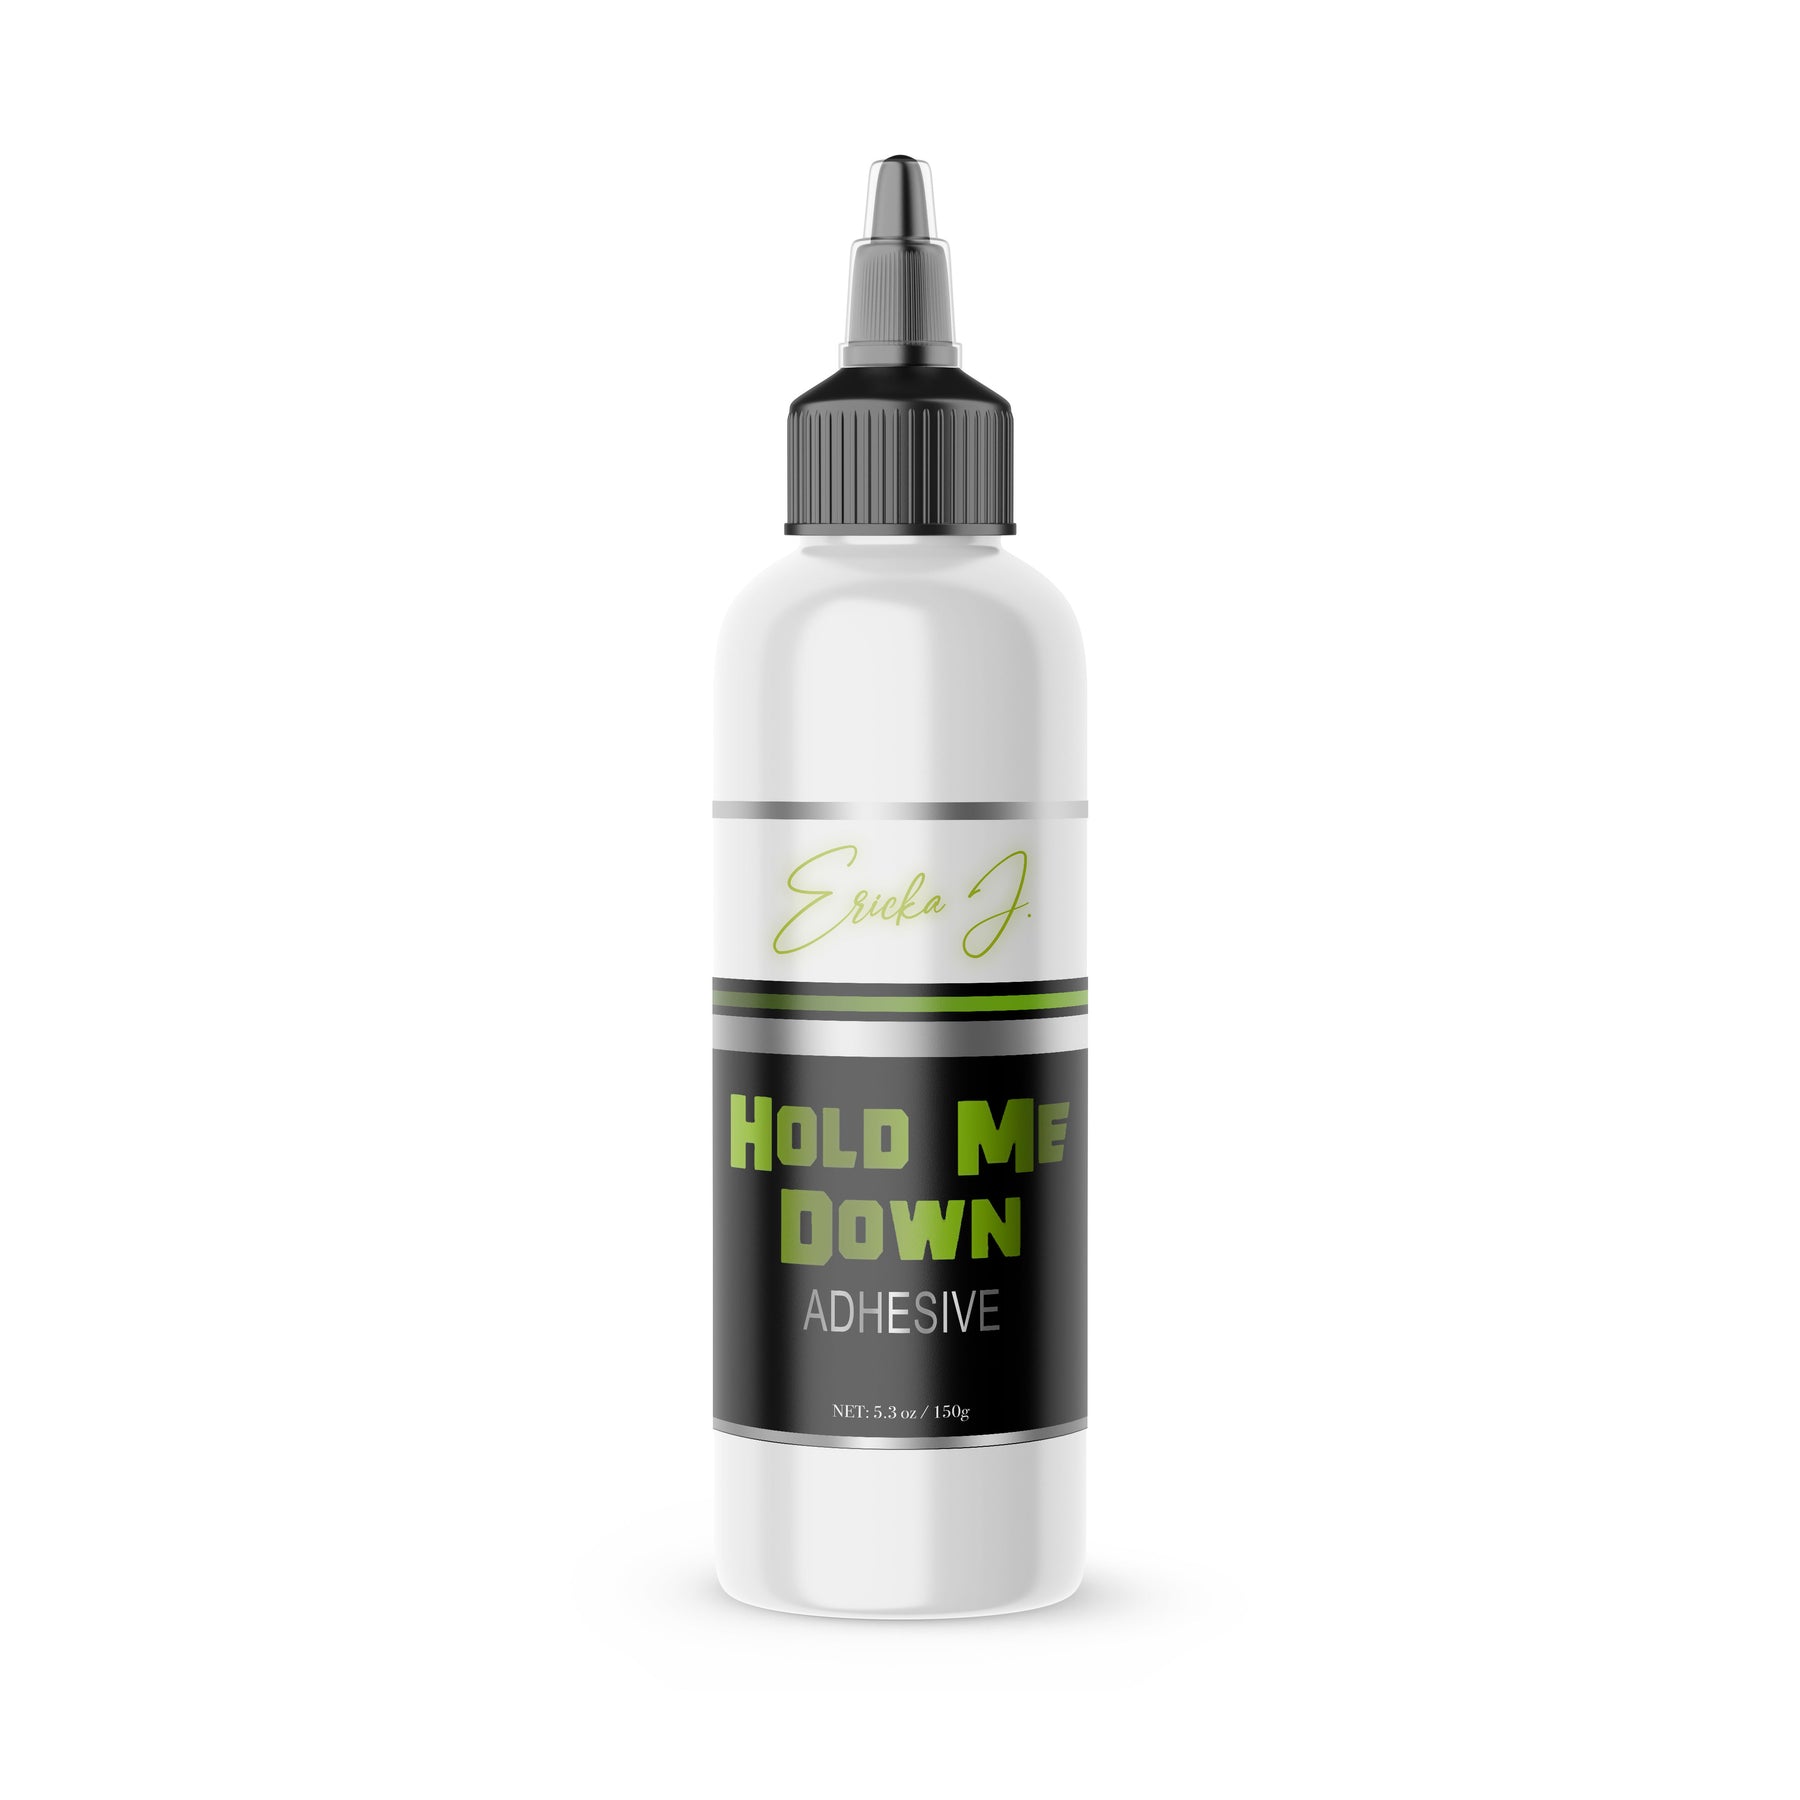 All Natural Hair Care Products: Hold Me Down Adhesive (Large) 5.3oz/150g